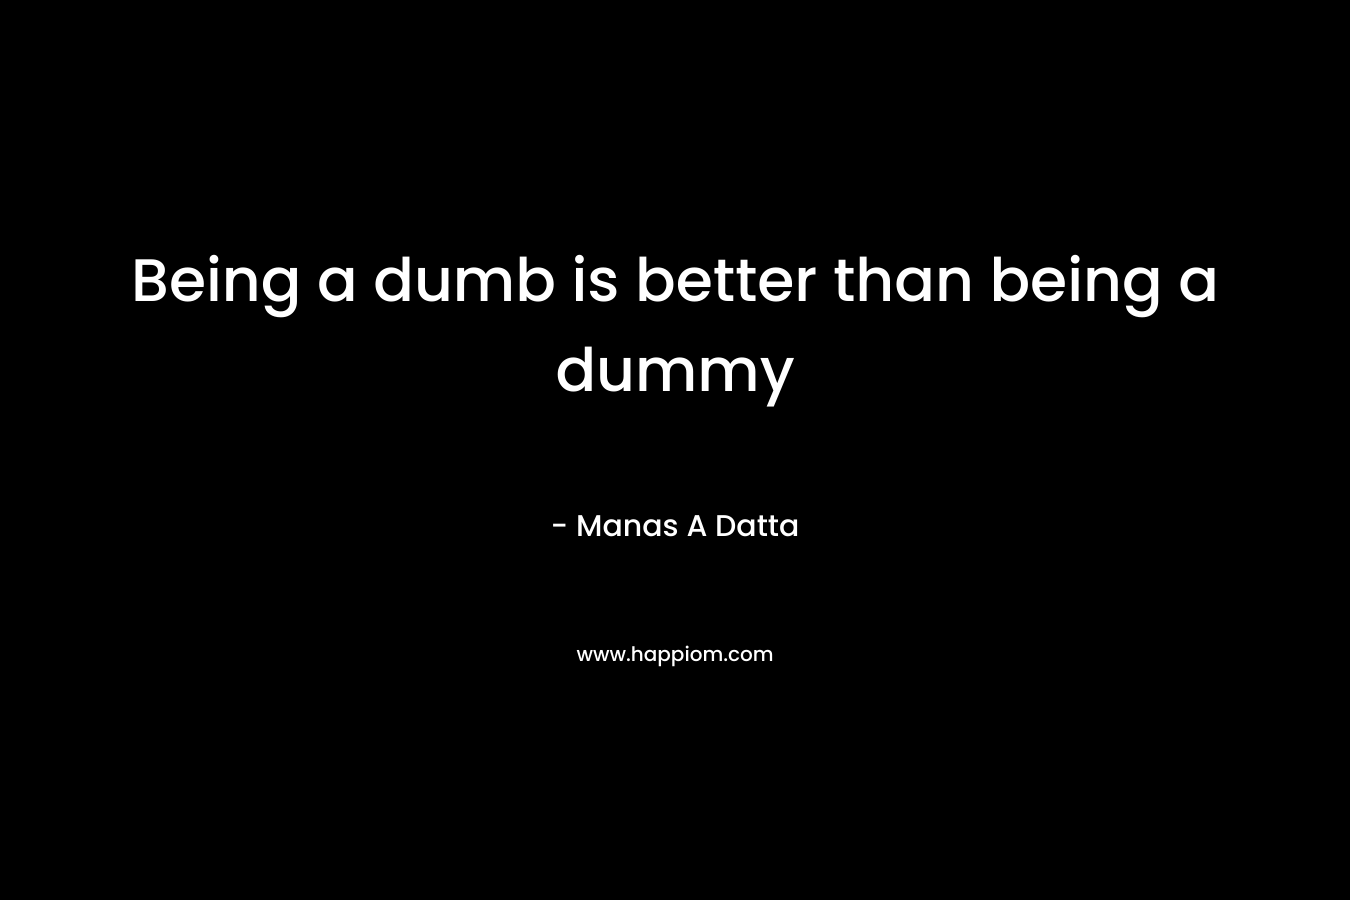 Being a dumb is better than being a dummy